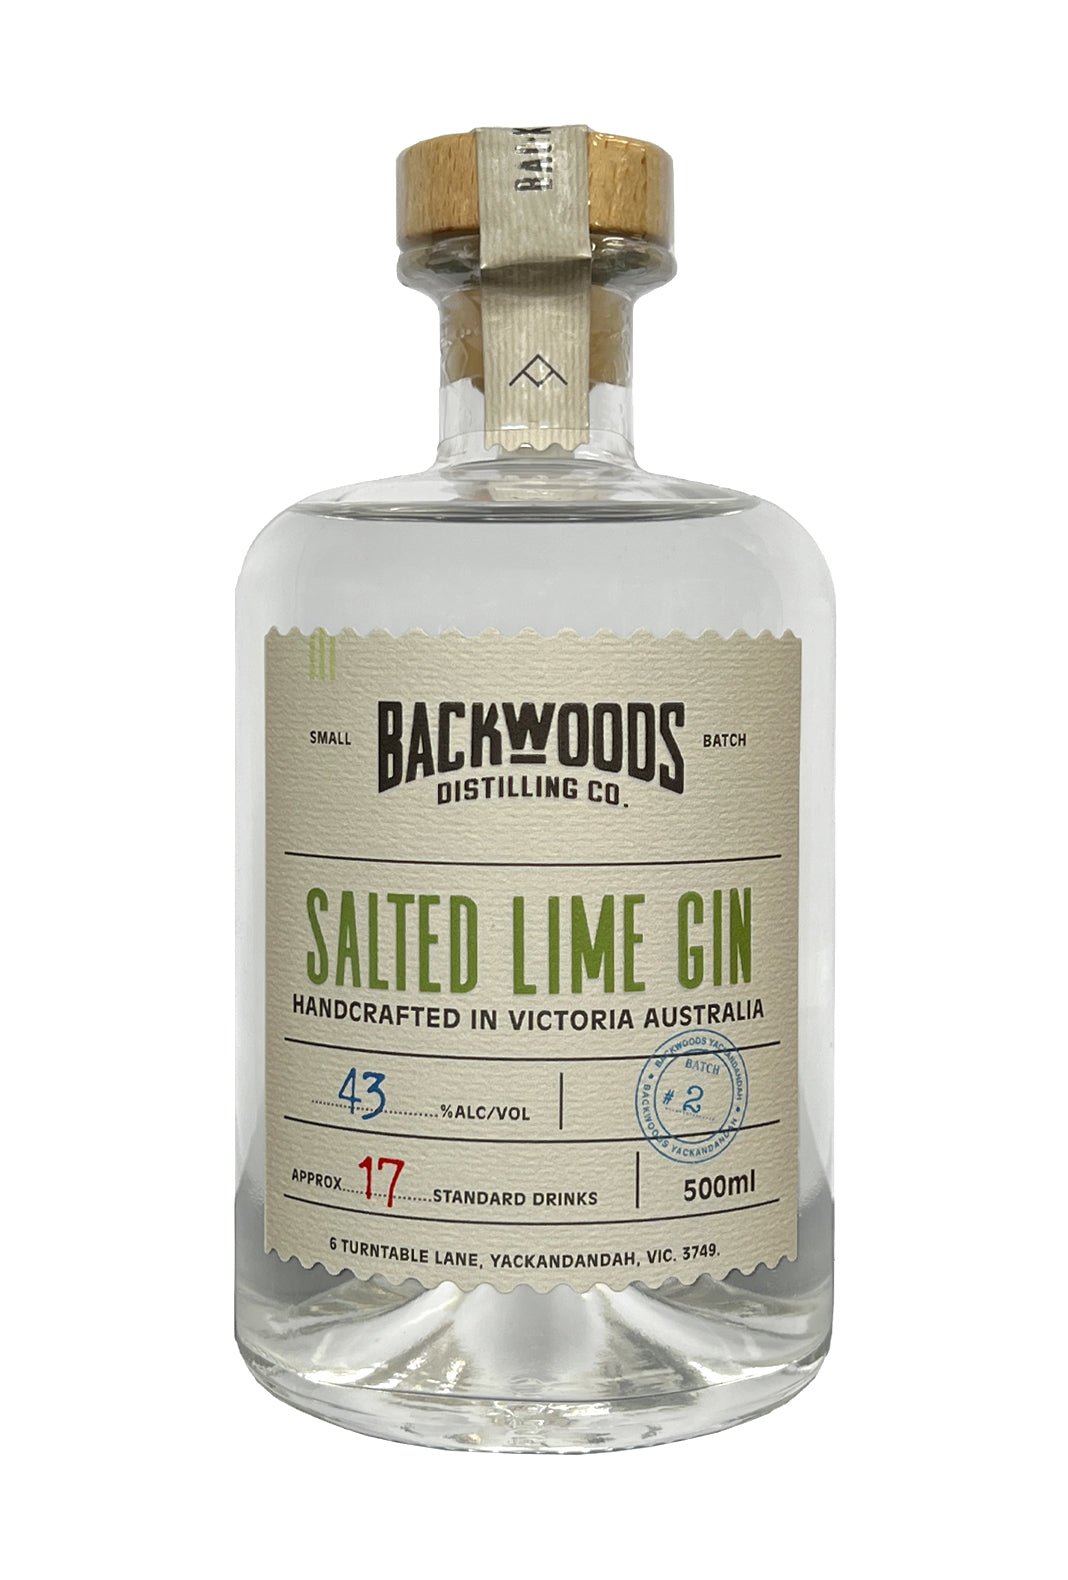 Backwoods Salted Lime Gin 43% 500ml | Gin | Shop online at Spirits of France